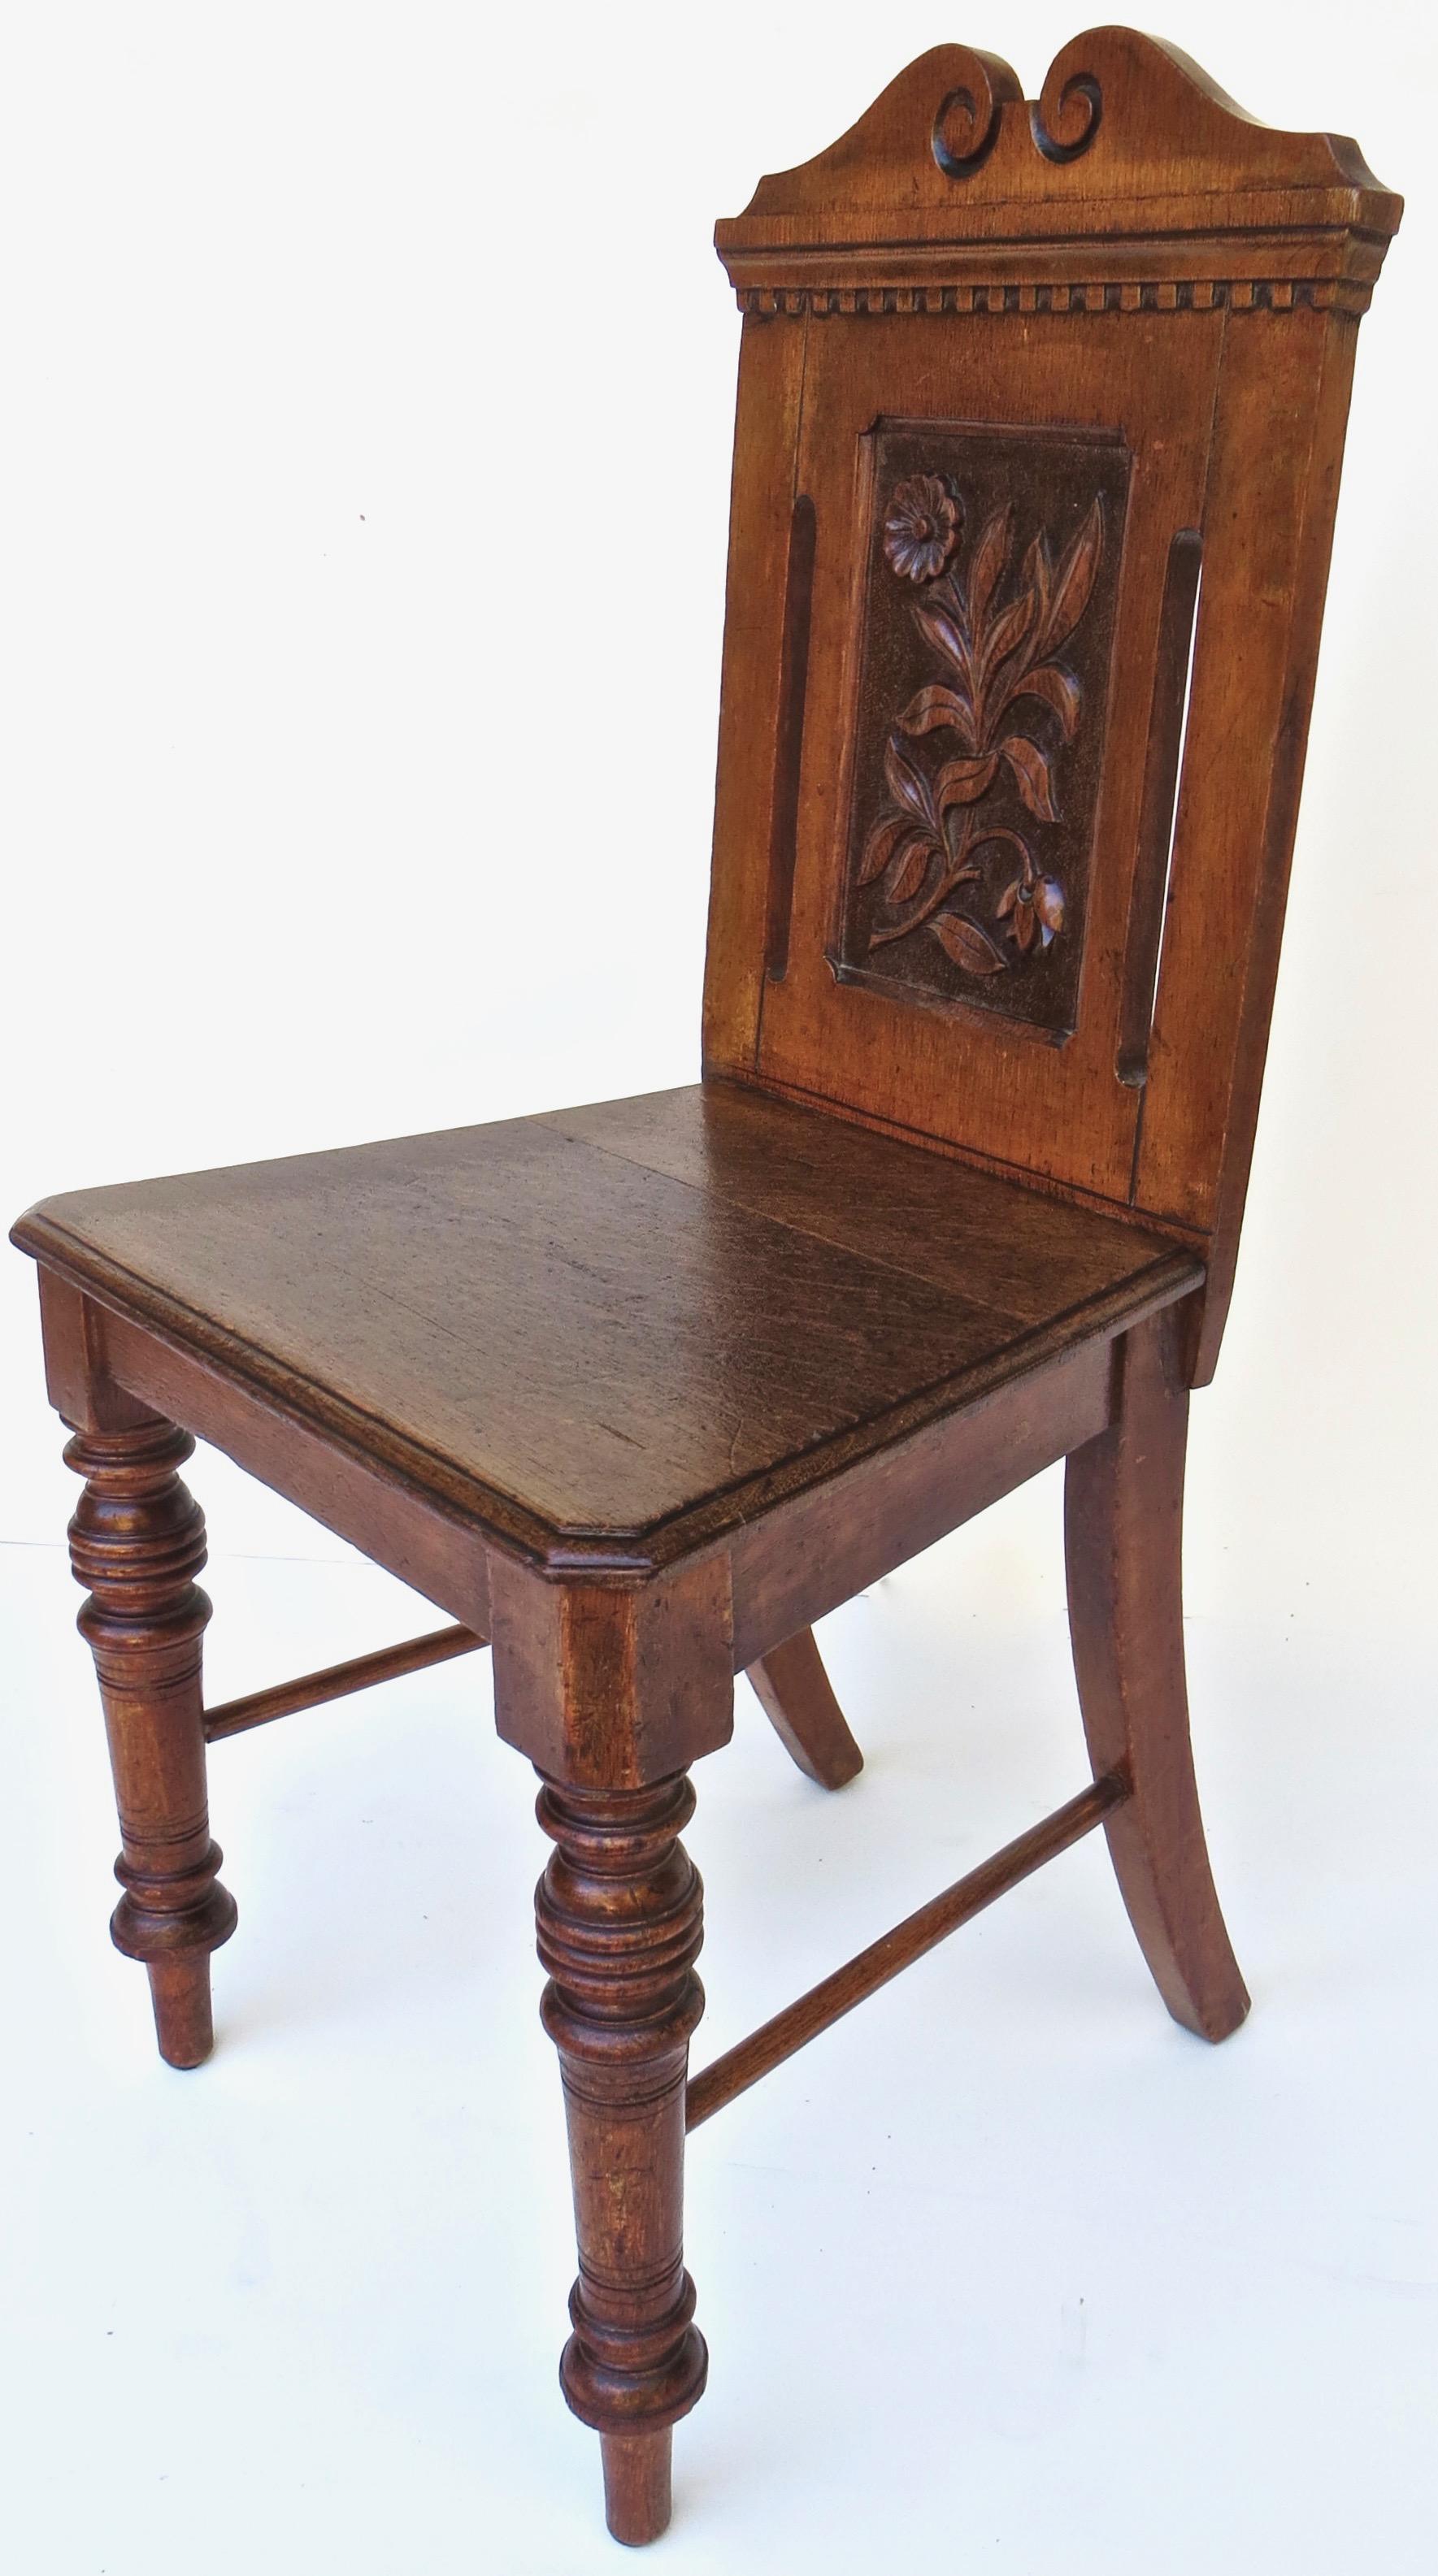 Late 19th century very unique English side chair in solid oak with carved back in floral motif. Two long vertical open slats (one to each side of the back) add to the unique design of this Victorian chair. The top carved and crested rail with a